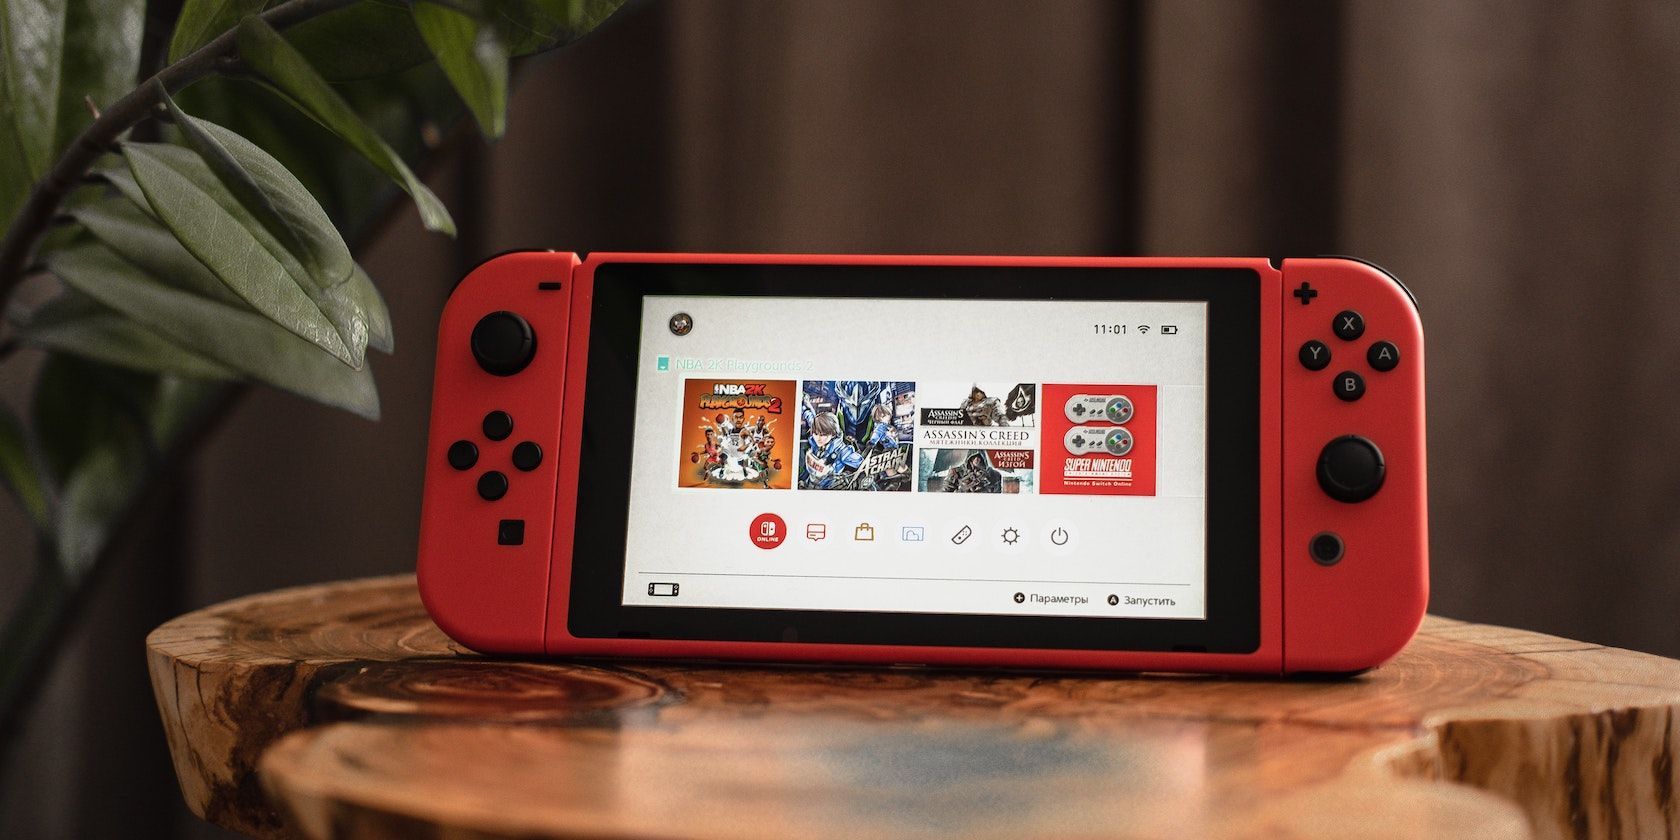 A photograph of a Nintendo Switch console on a wooden table